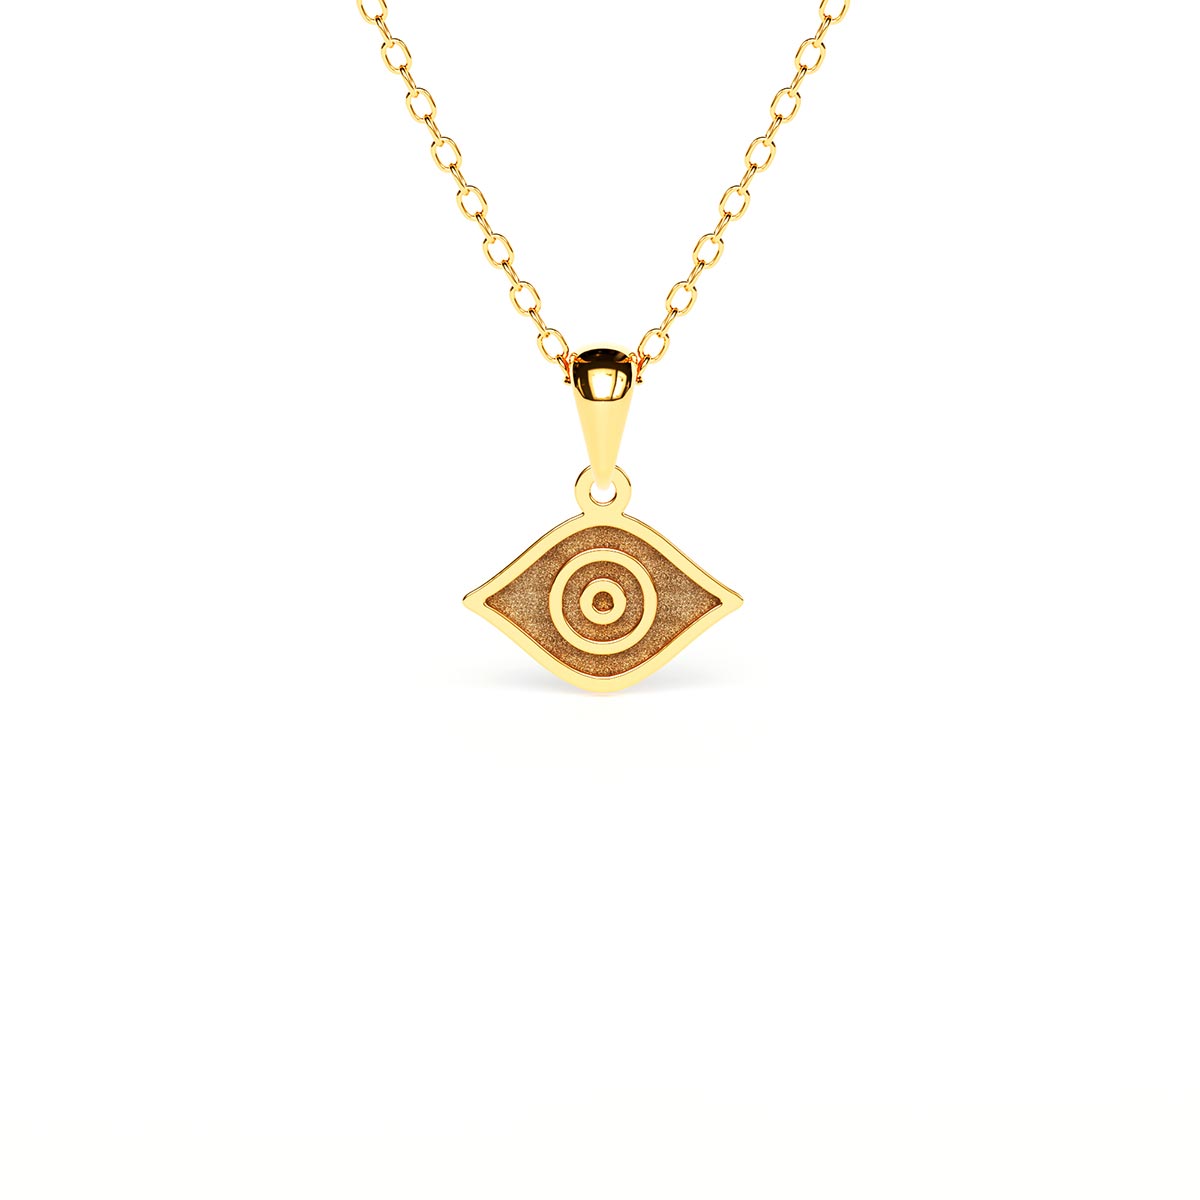 Radial Textured Evil Eye Necklace